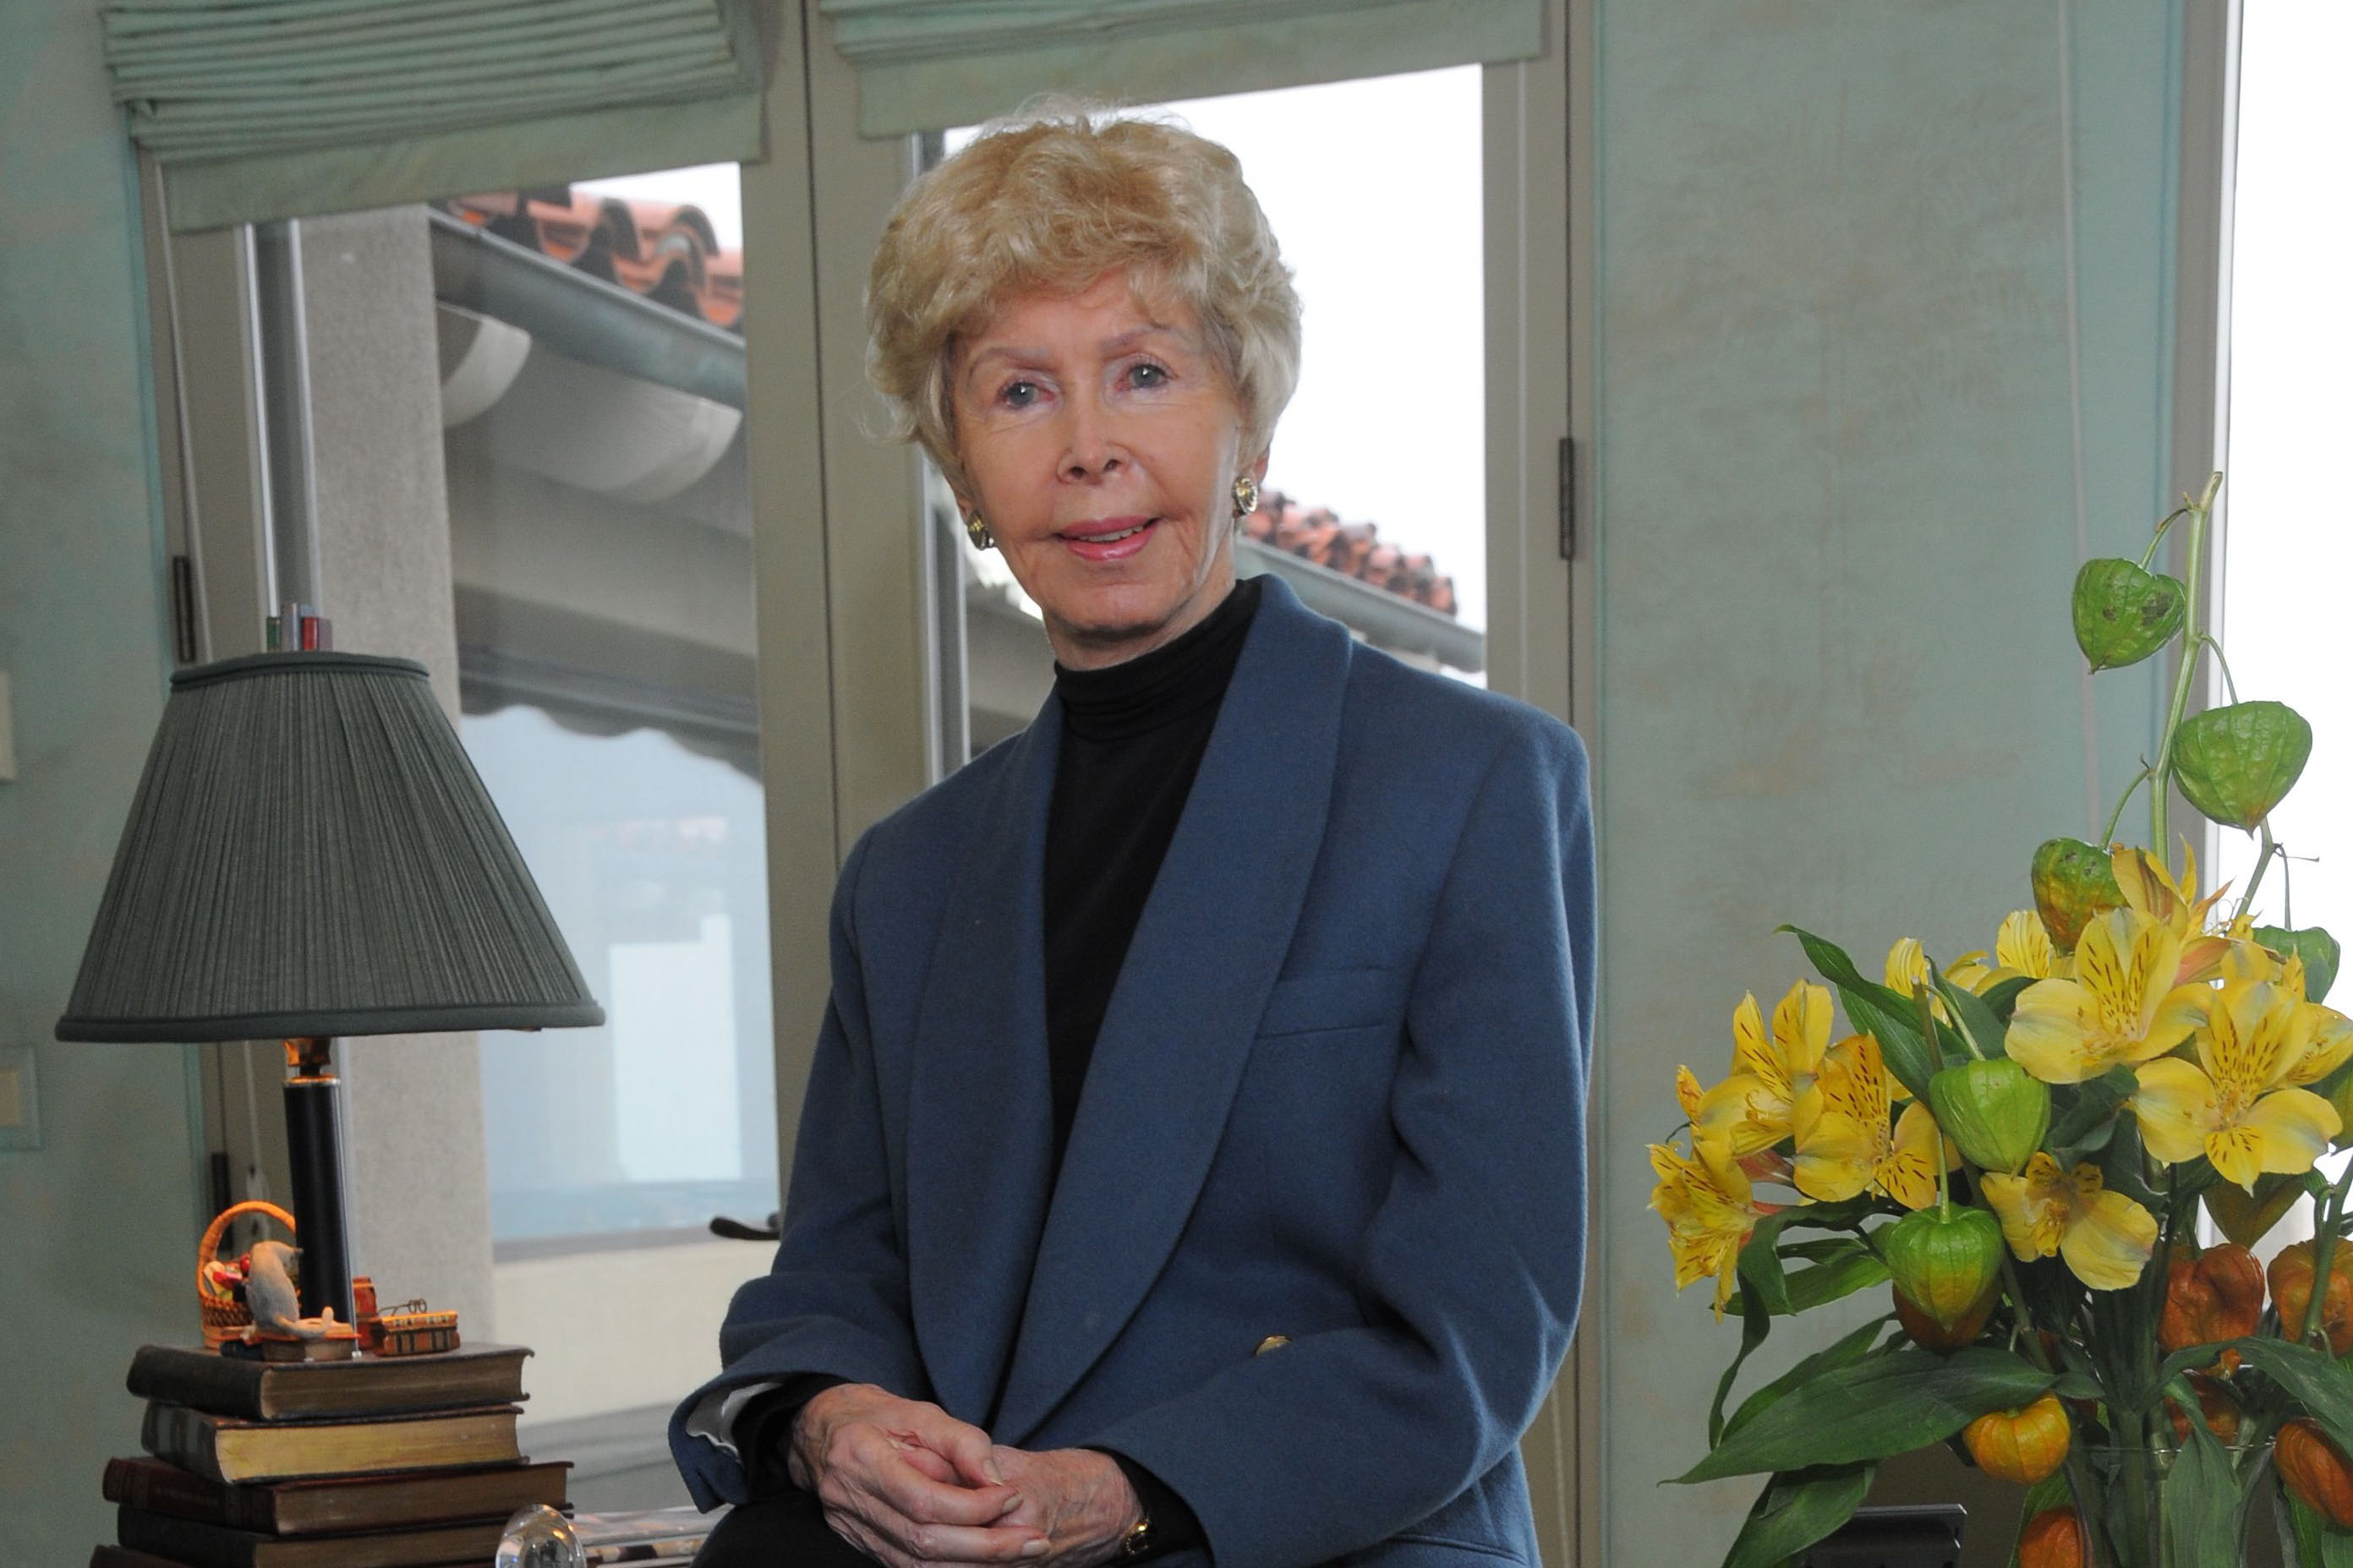 UC San Diego Mourns the Loss of “Mrs. Seuss” Audrey Geisel